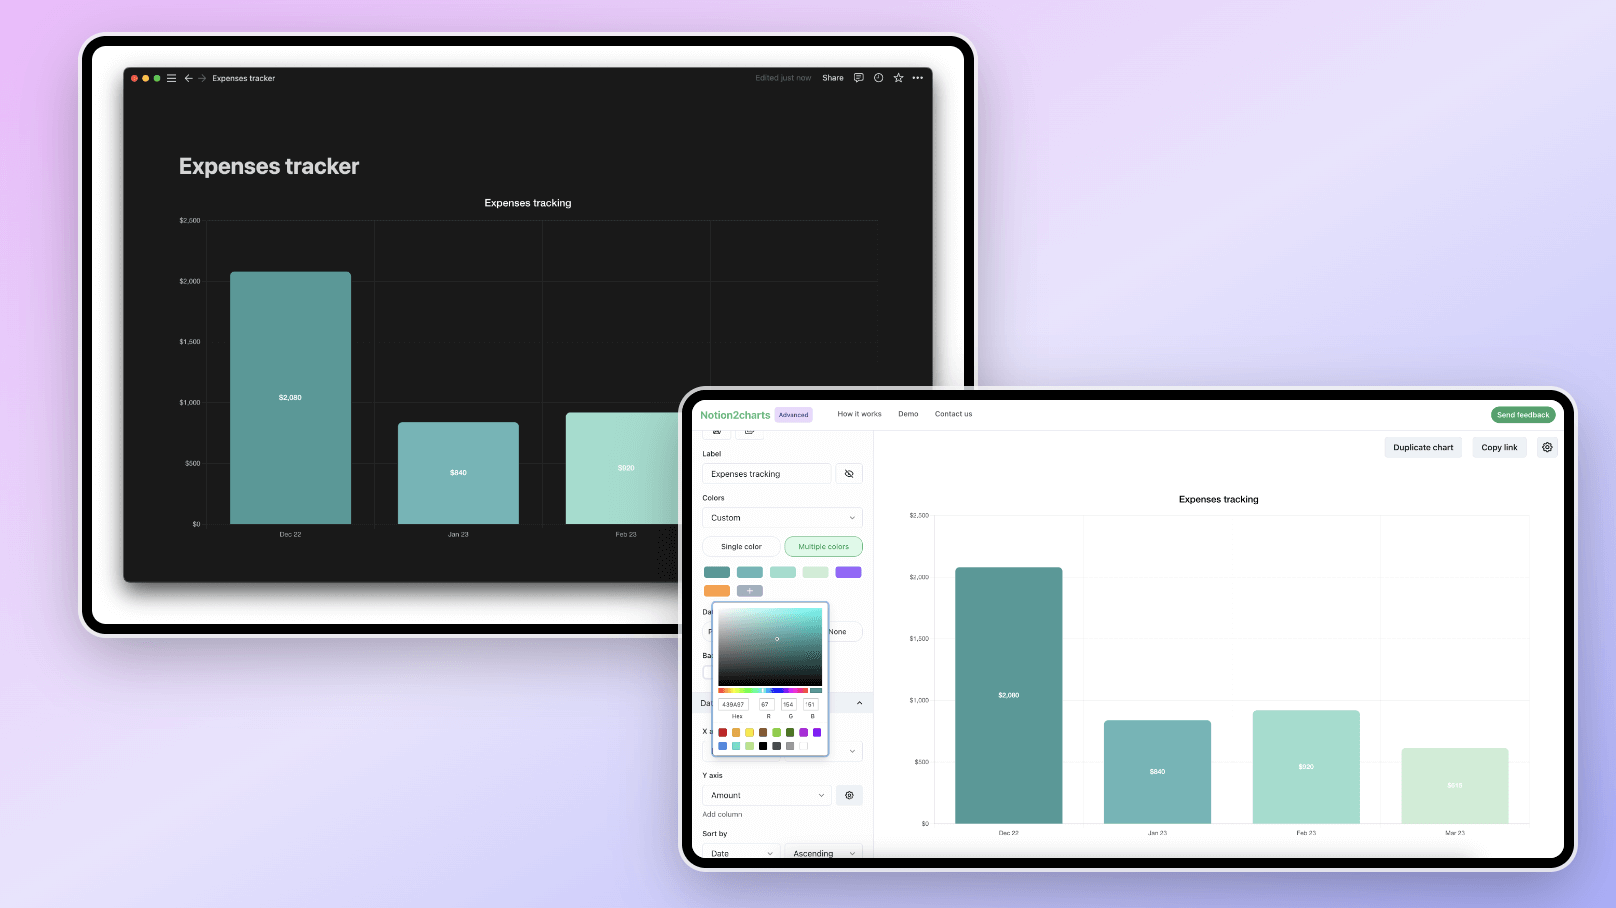 How to customize charts in Notion2Charts